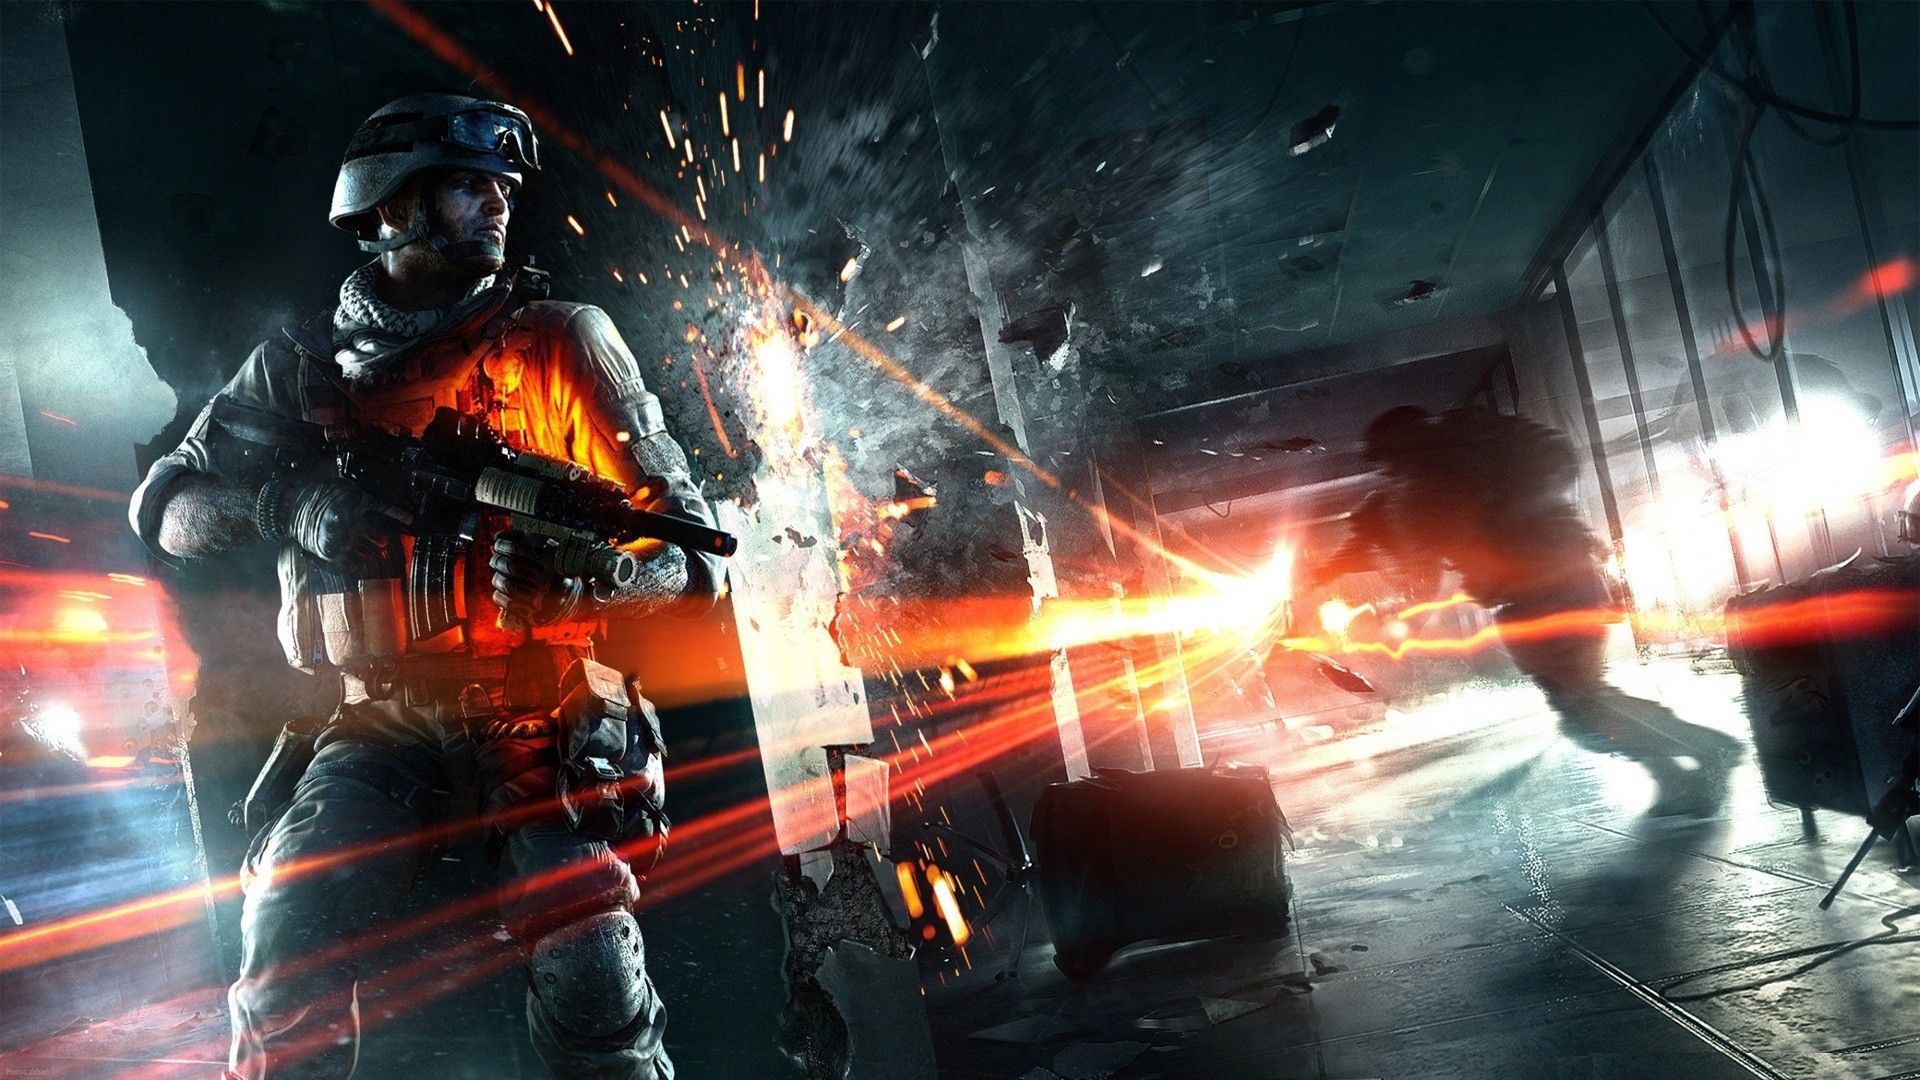 soldiers, video games, fire, fight, EA Games, Battlefield 3